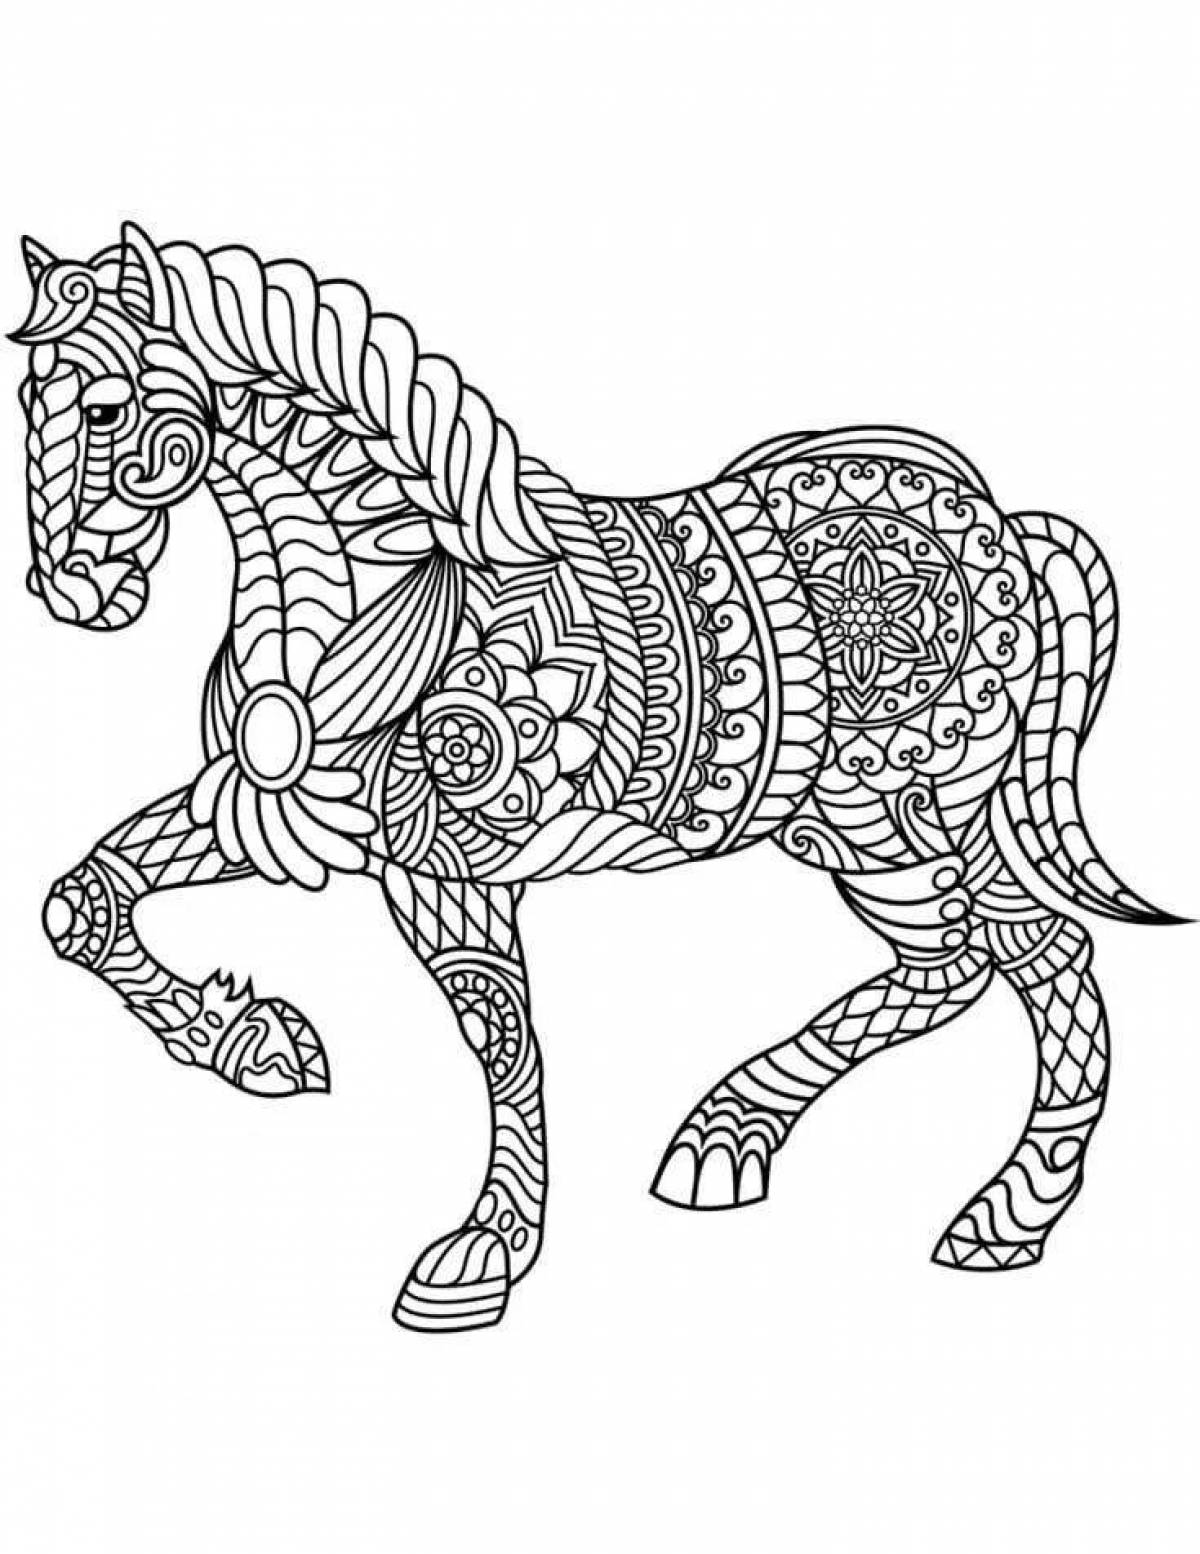 Playful animal coloring page with pattern